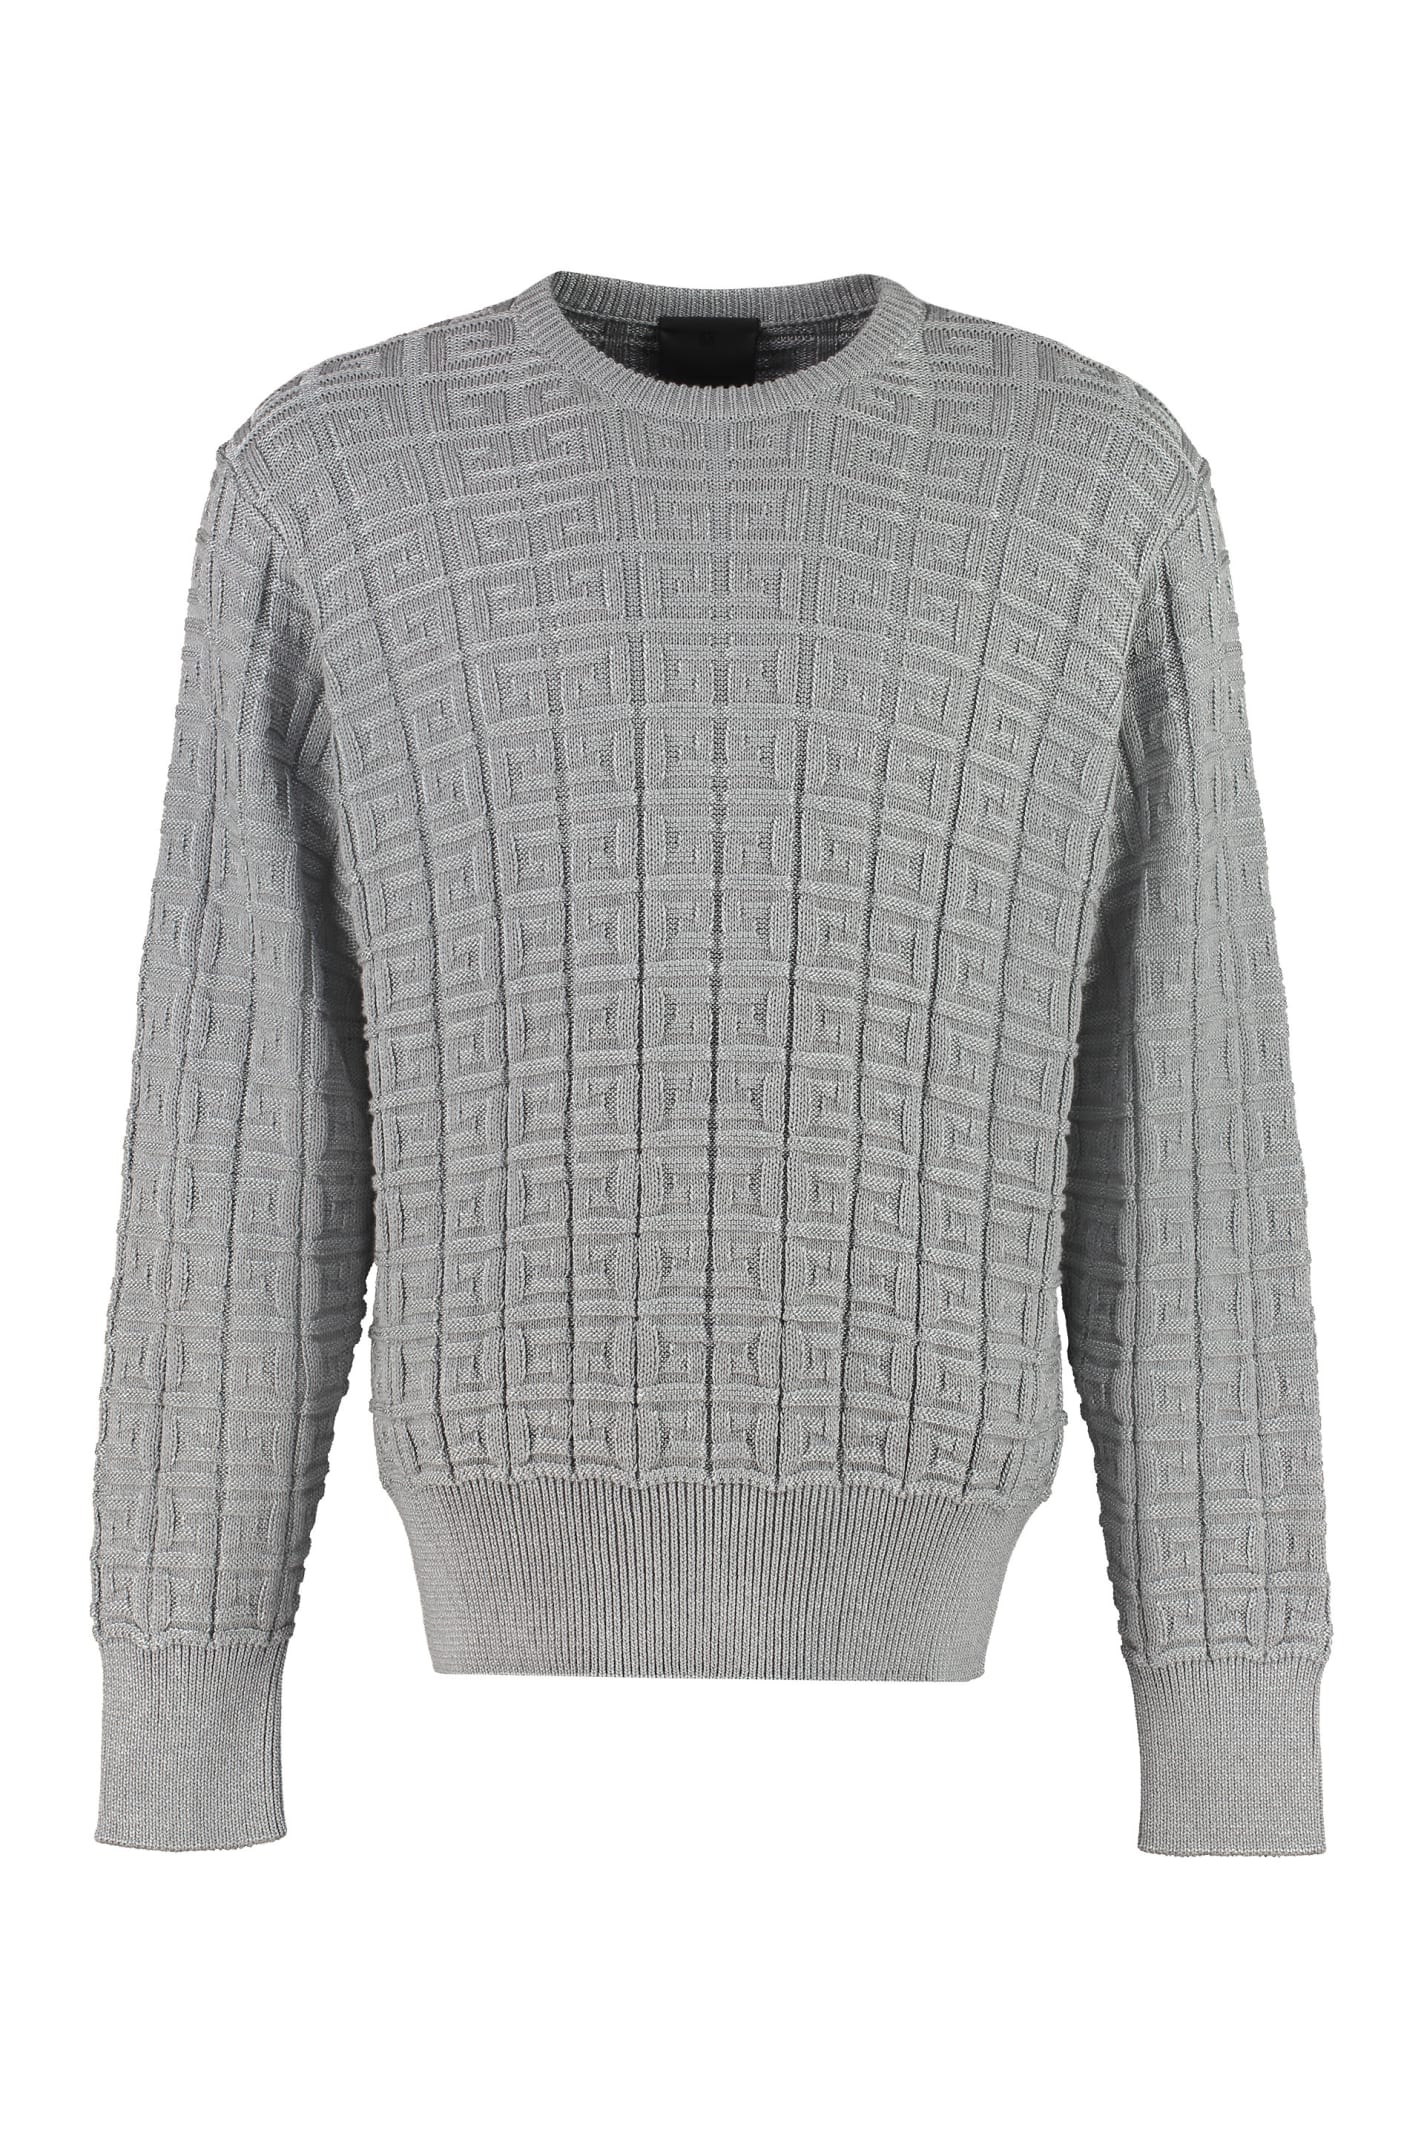 Givenchy Cotton Crew-neck Sweater